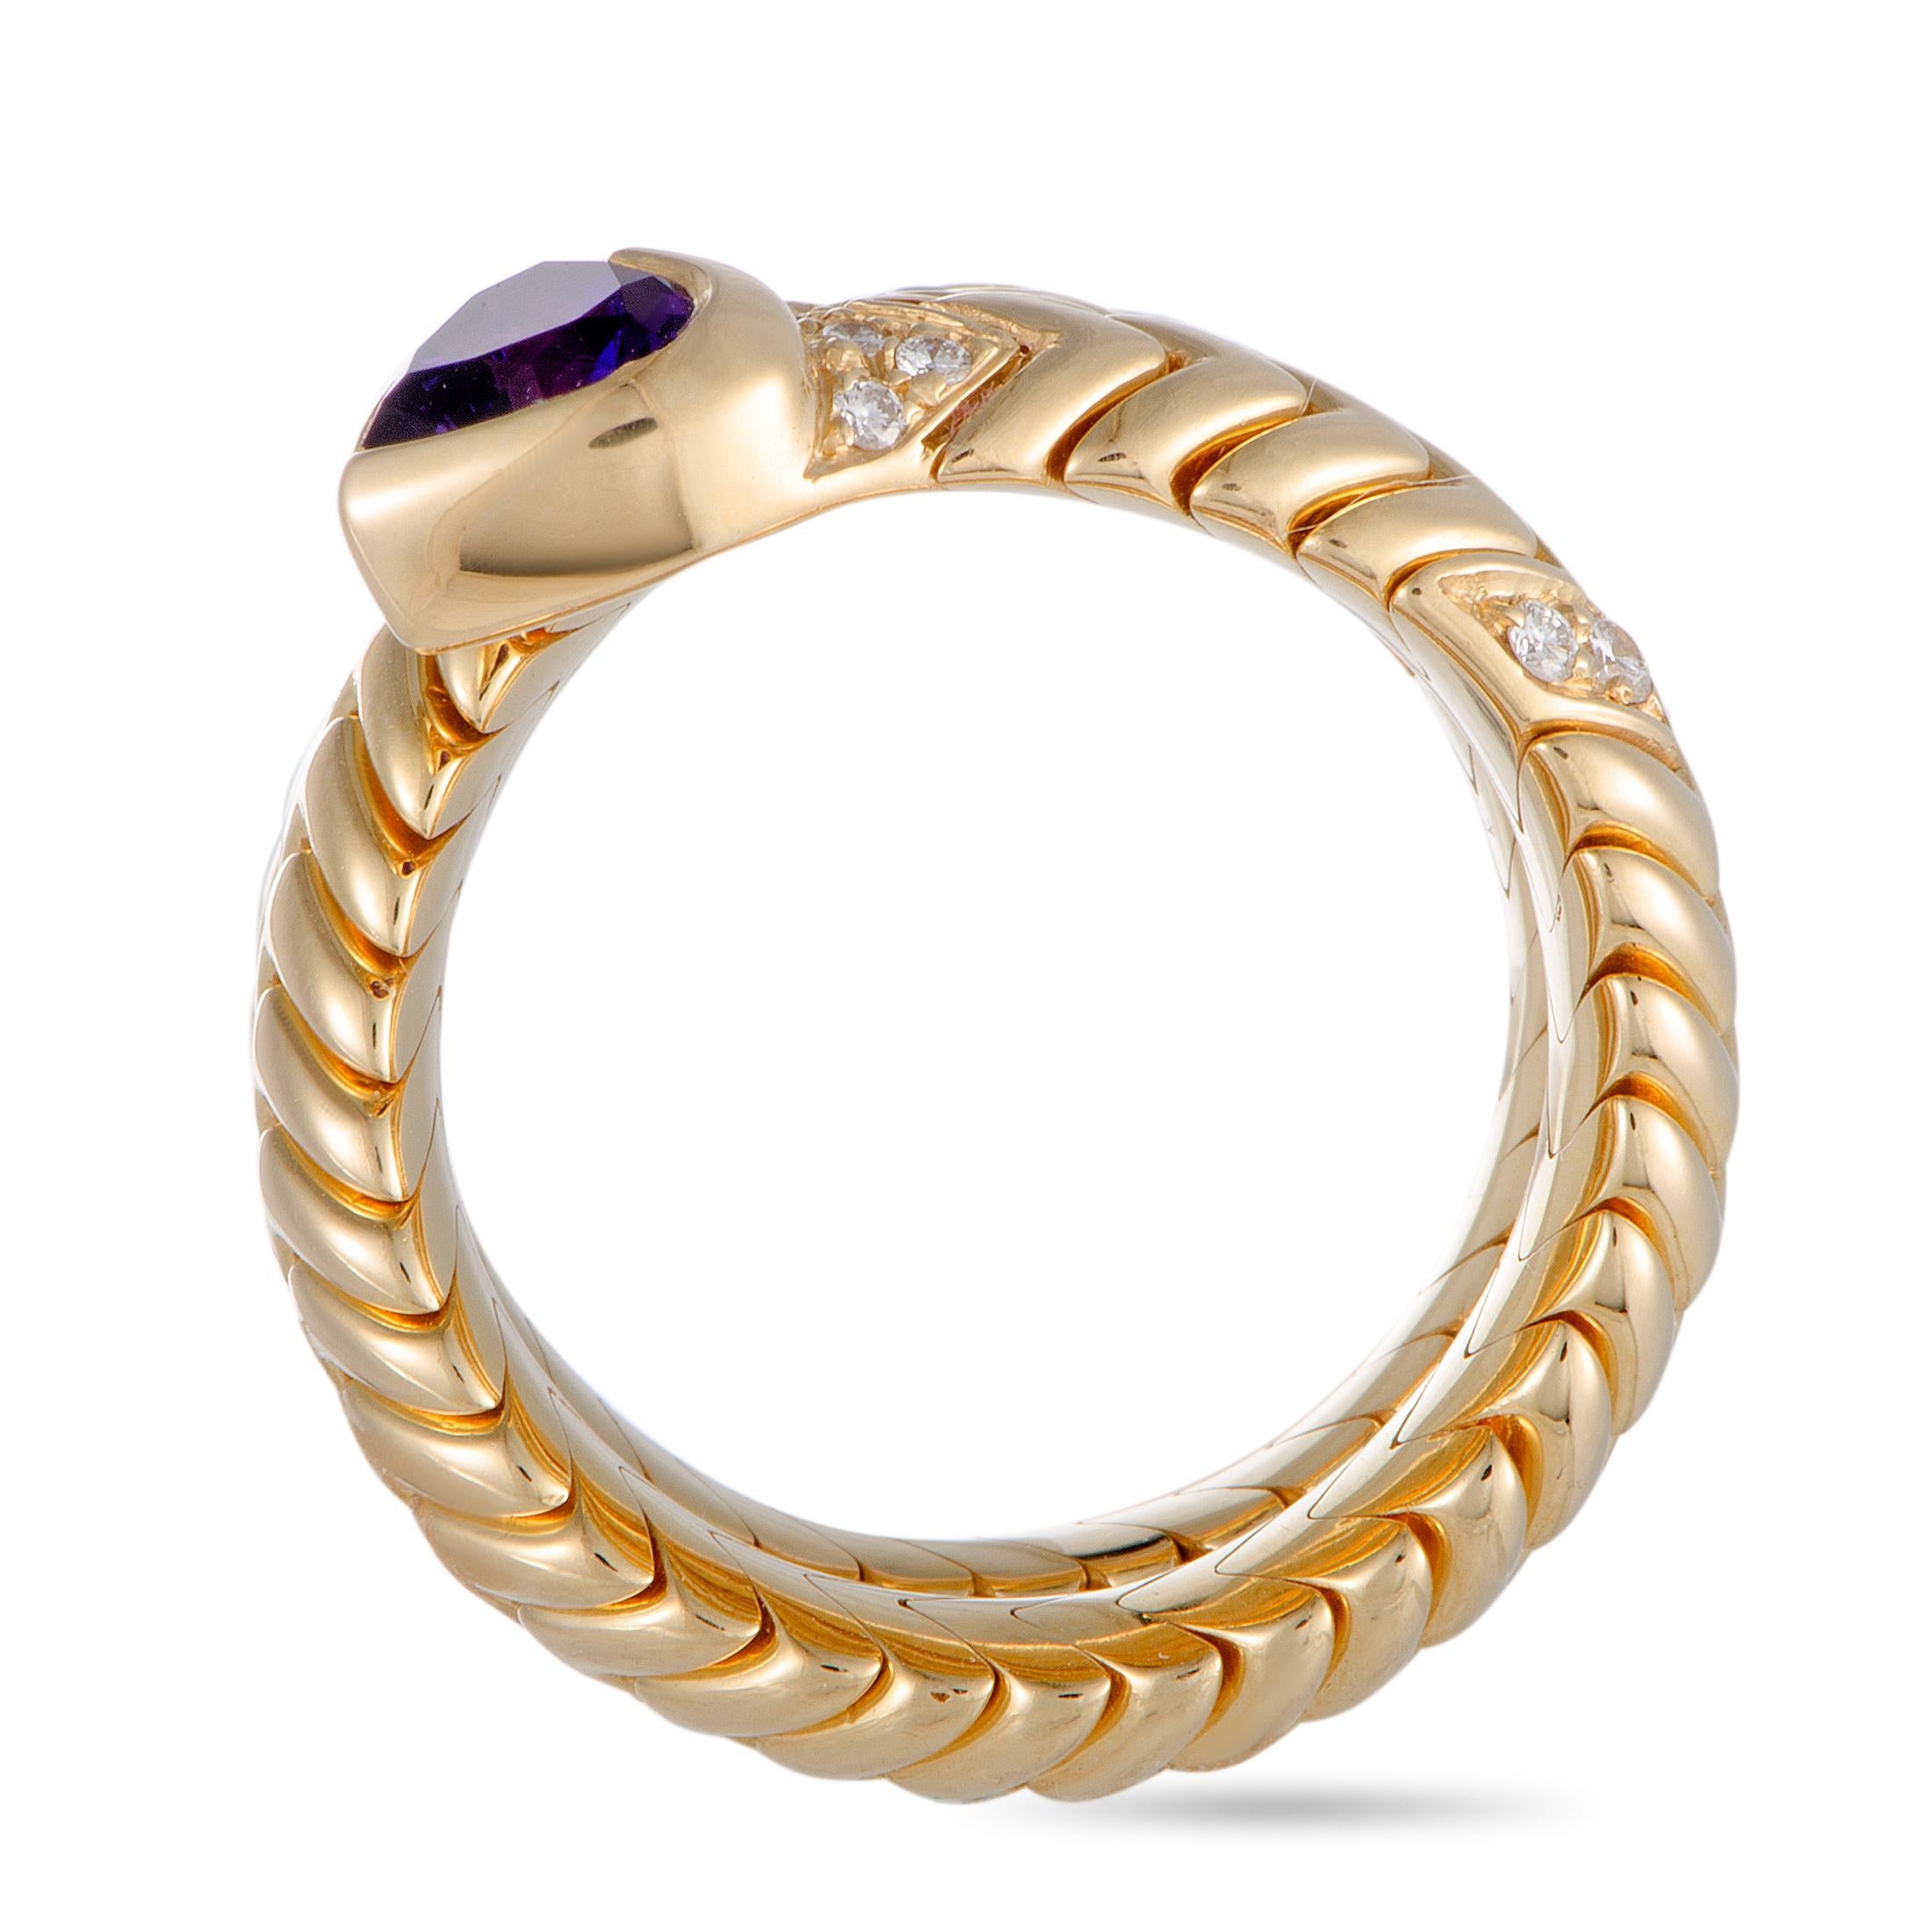 The Bvlgari “Spiga” ring is crafted from 18K yellow gold and set with an amethyst and a total of 0.30 carats of diamonds that feature grade F color and VS1 clarity. The ring weighs 22.9 grams, boasting band thickness of 11 mm and top height of 5 mm,